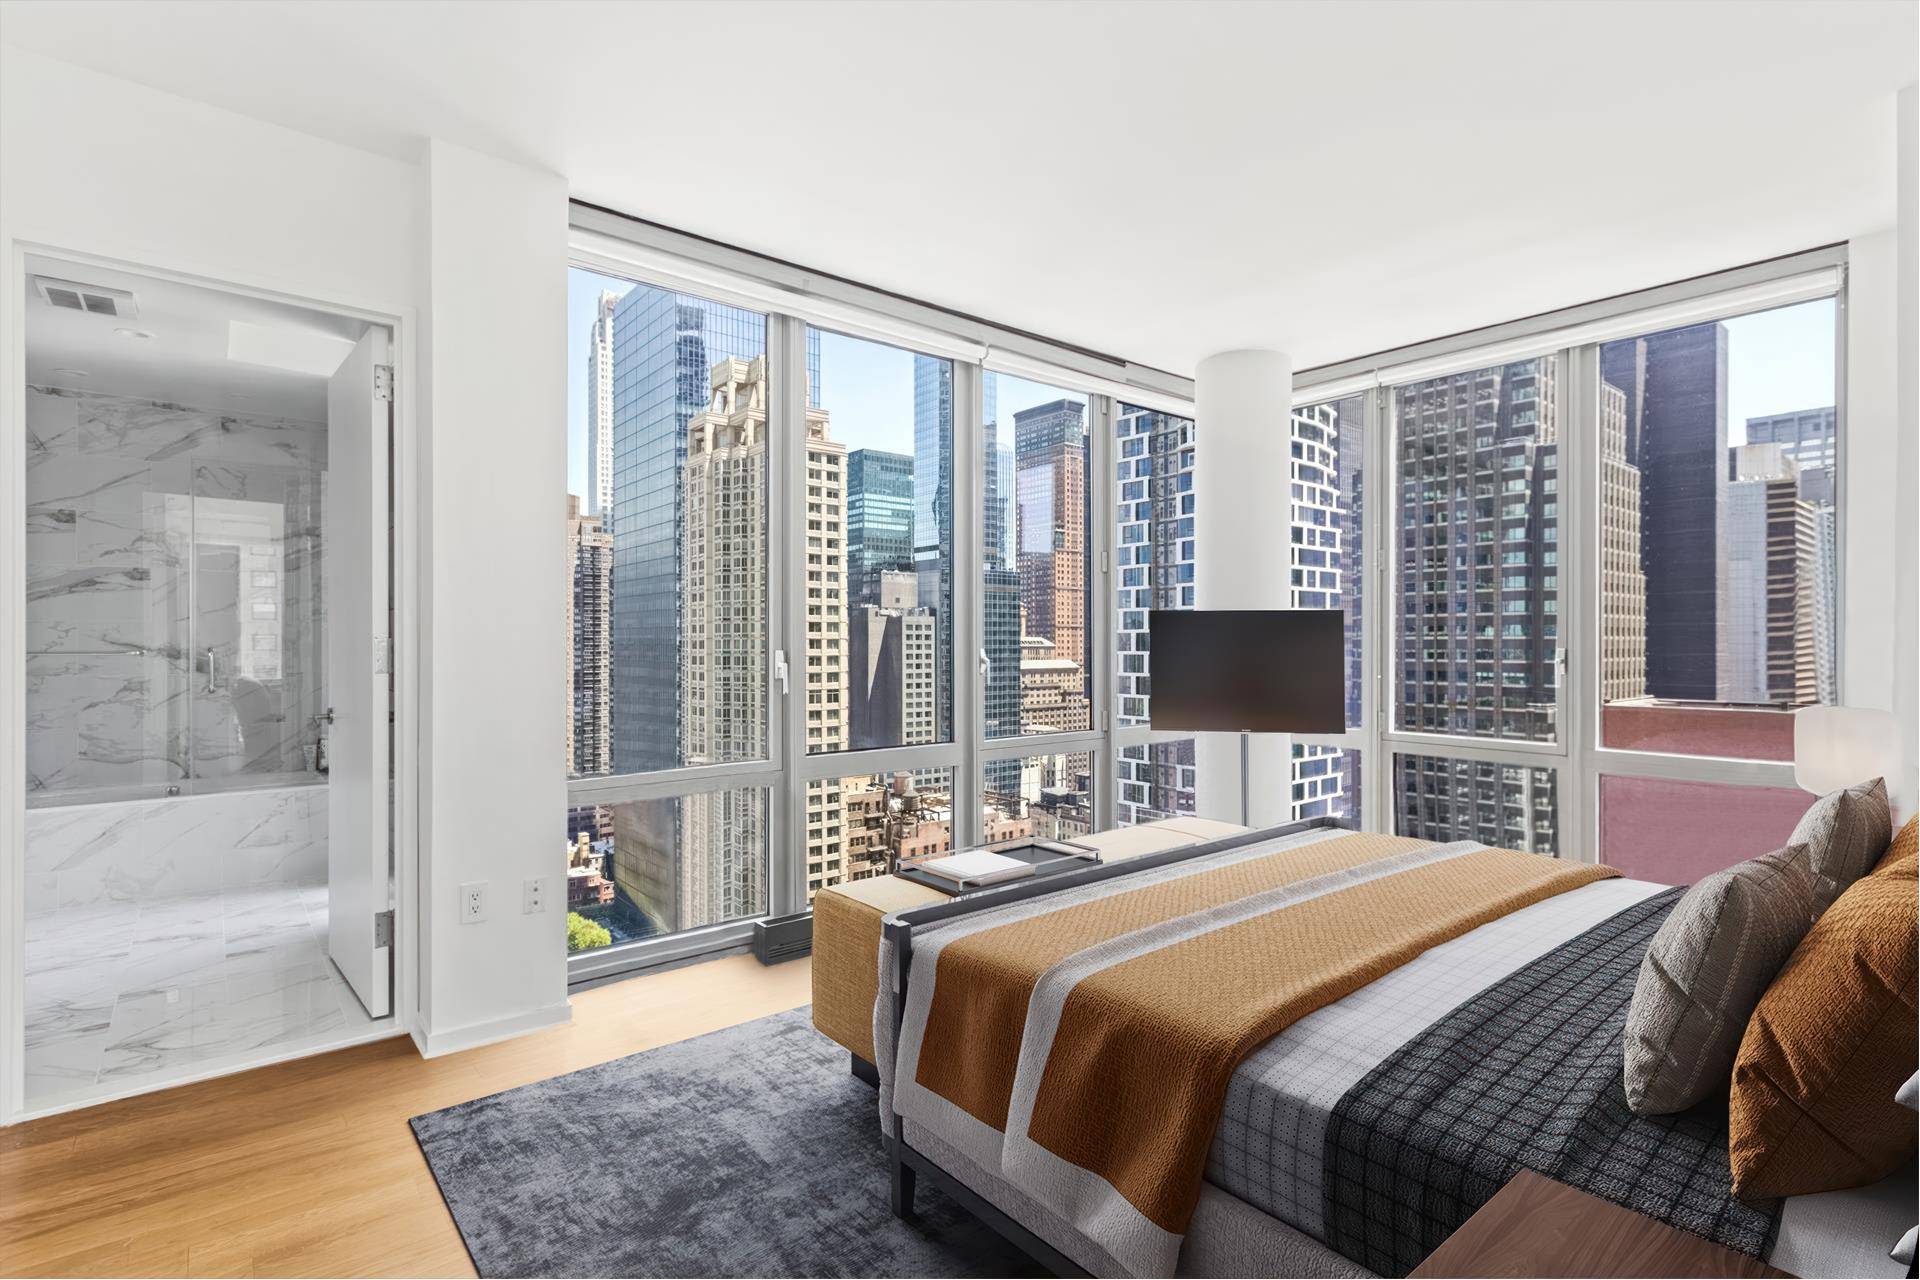 Welcome to the Link at 310 West 52nd Street Unit 30A.